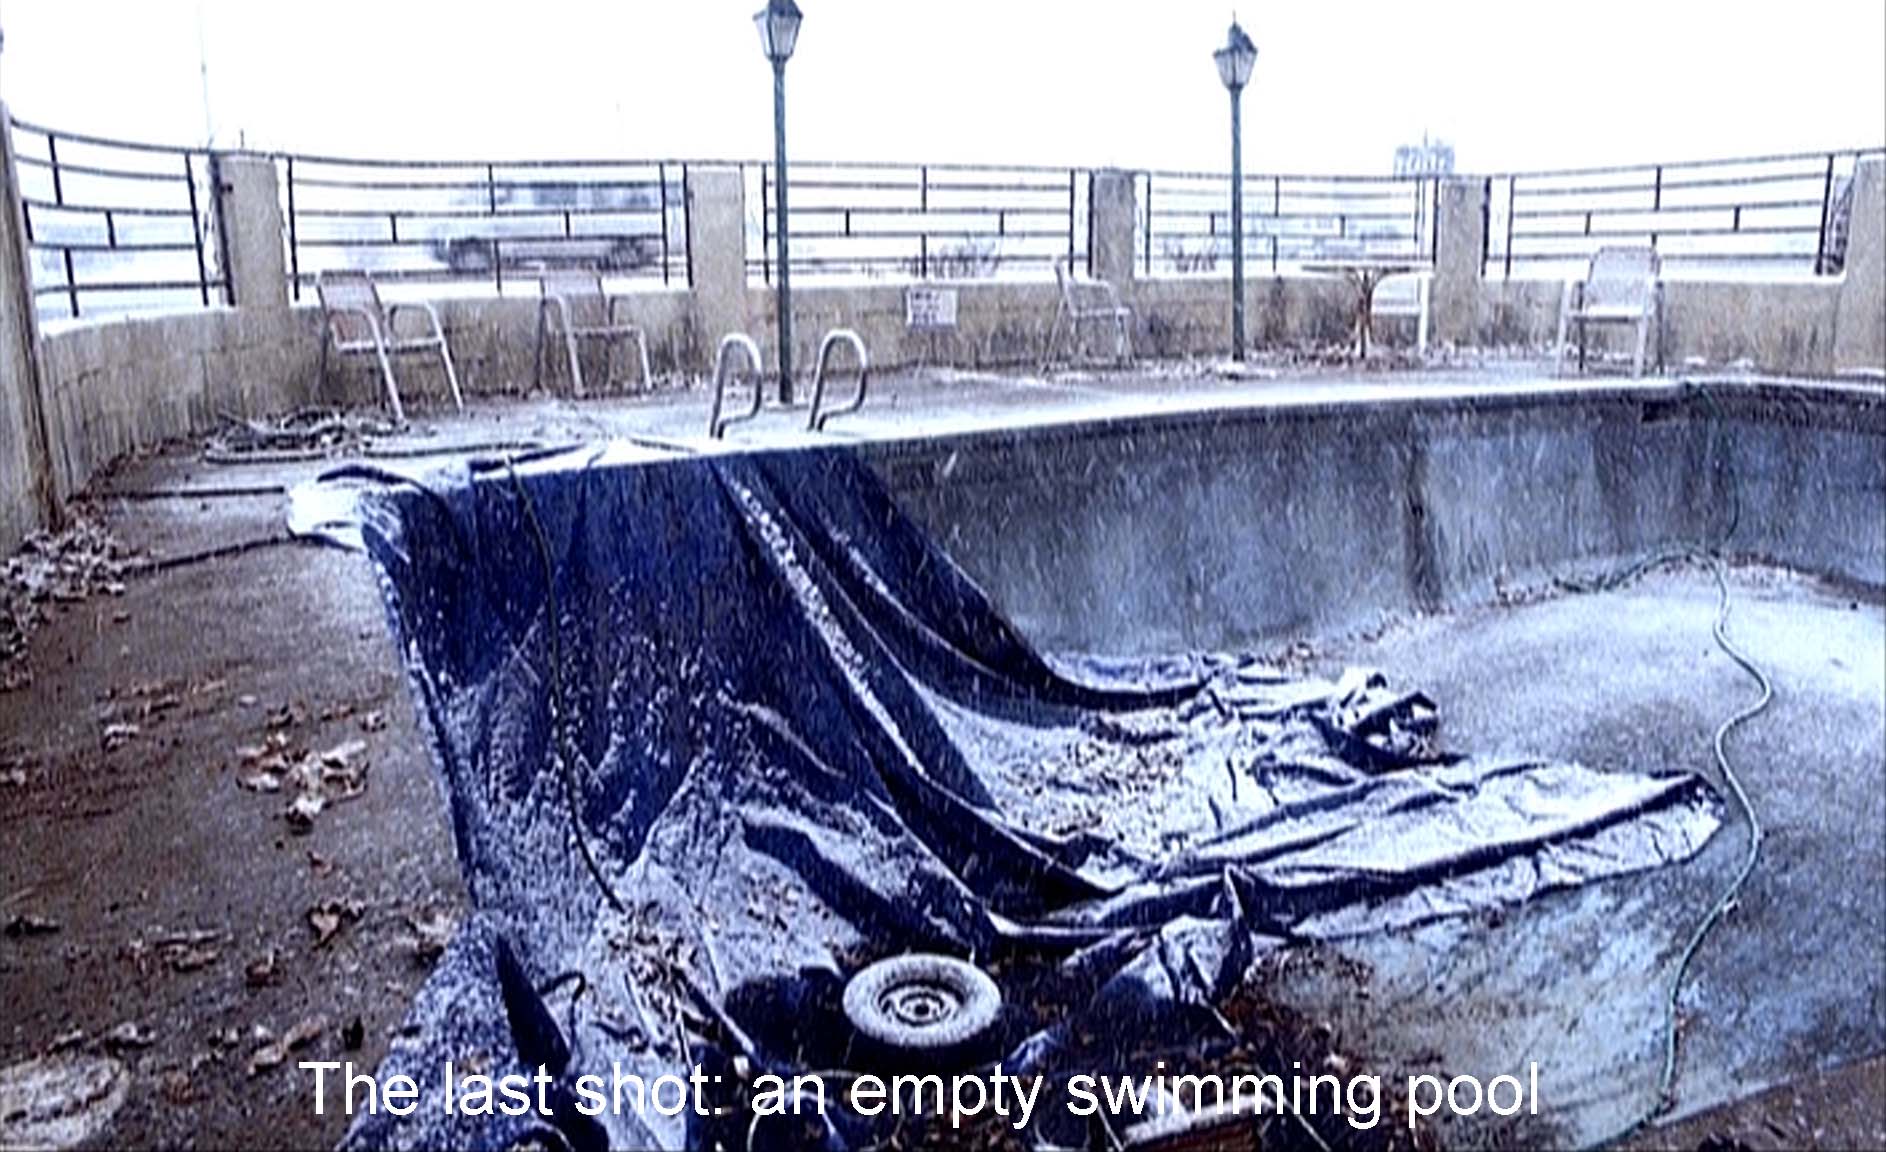 The last shot: an empty swimming pool